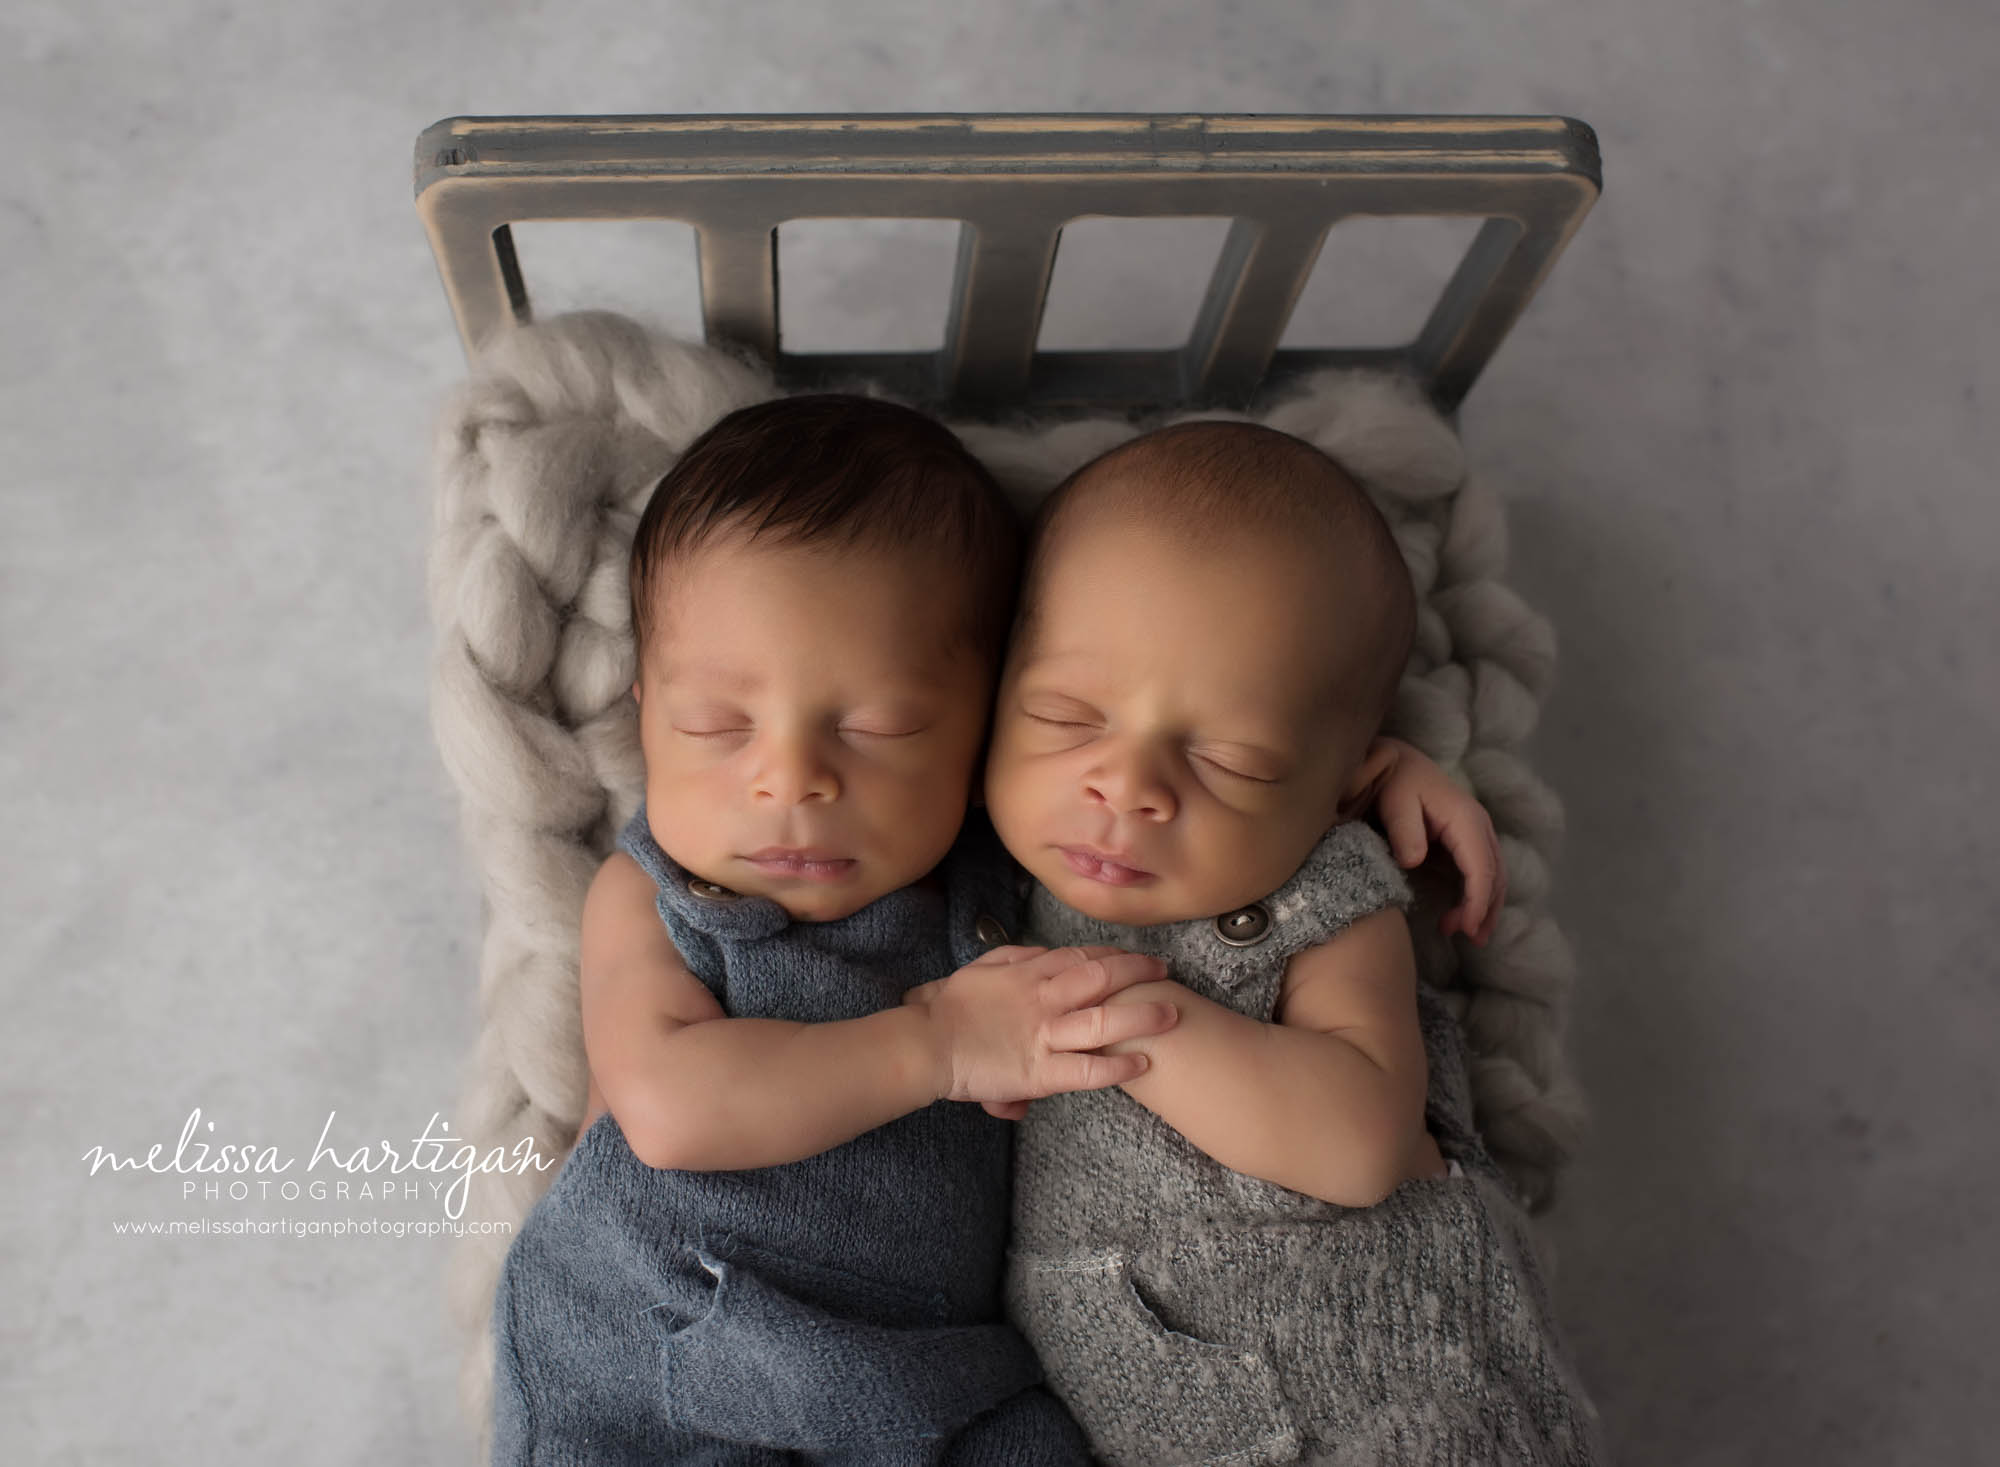 newborn twin boys posed on wooden bed prop wearing blue and gray newborn outfits CT newborn Photographer